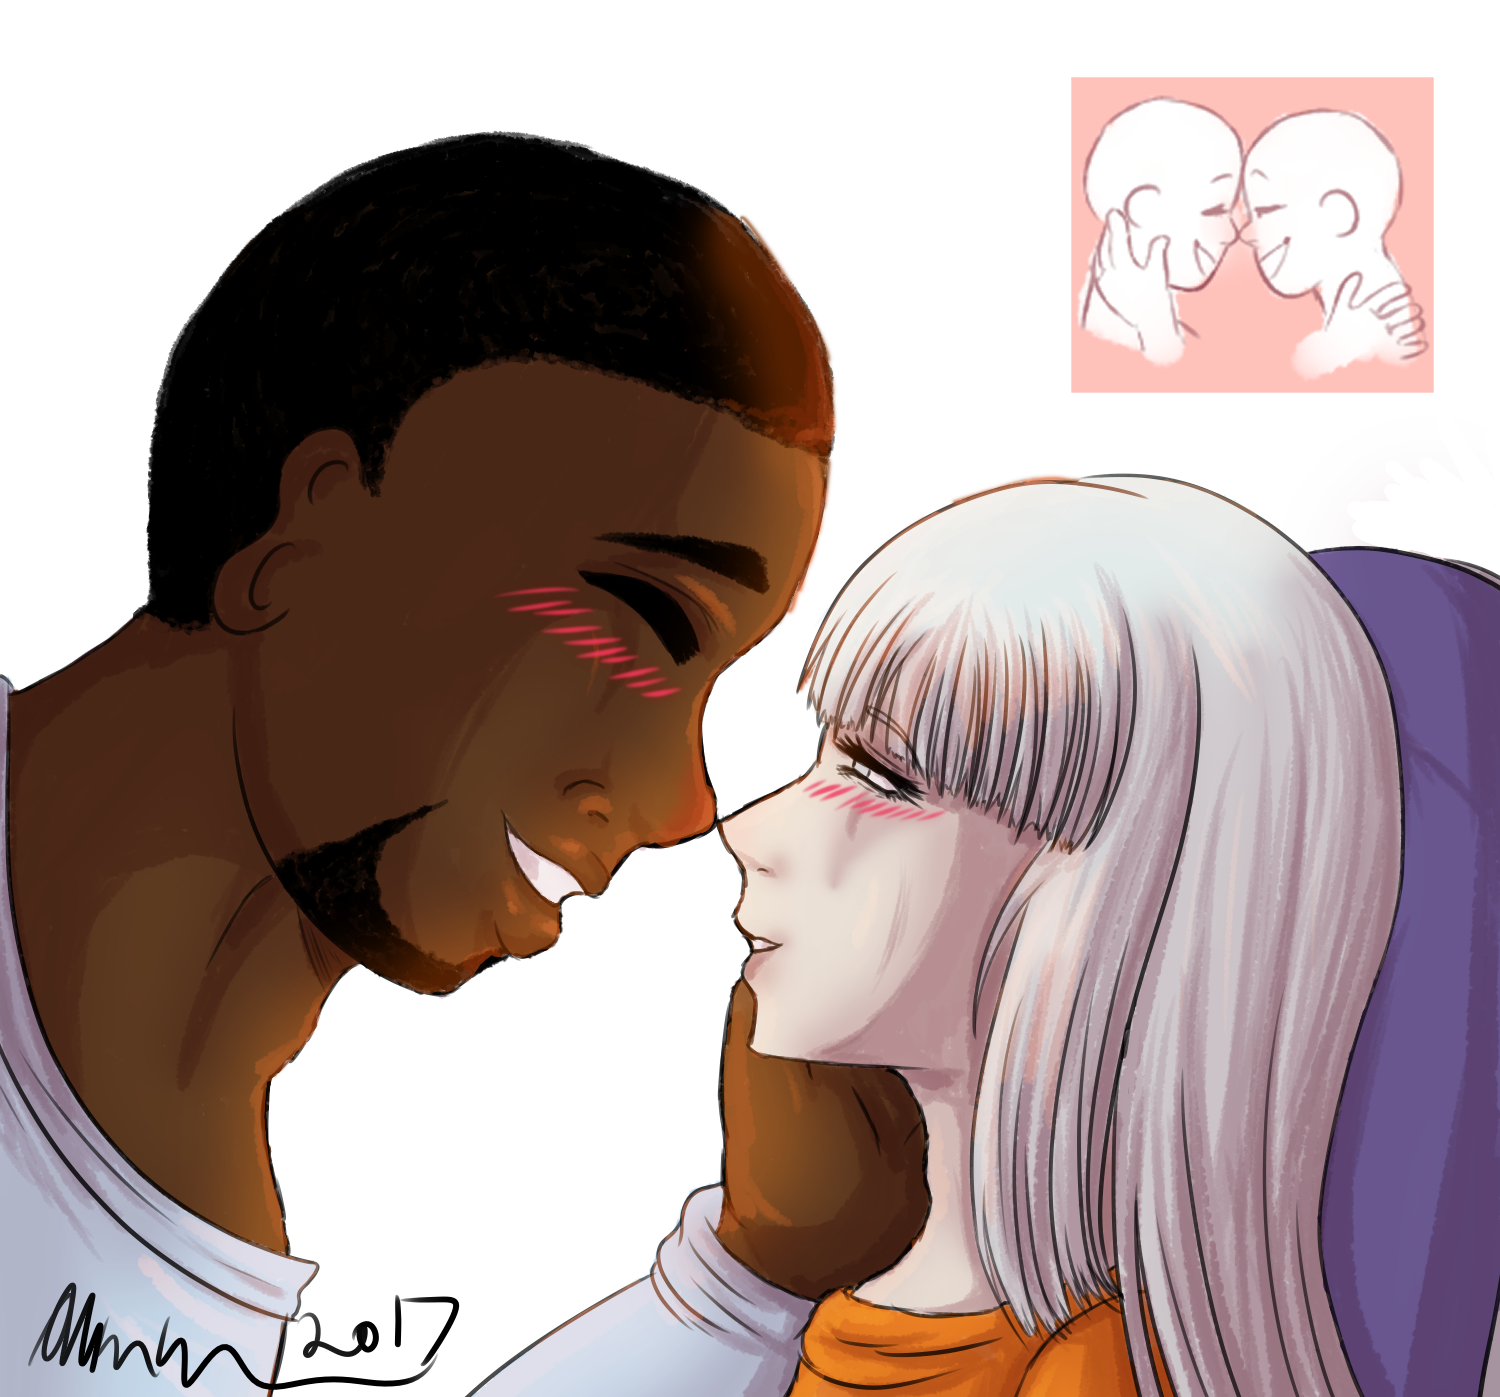 2B (Couples): Orsin and Sybil are Adorable by artisticallystrange